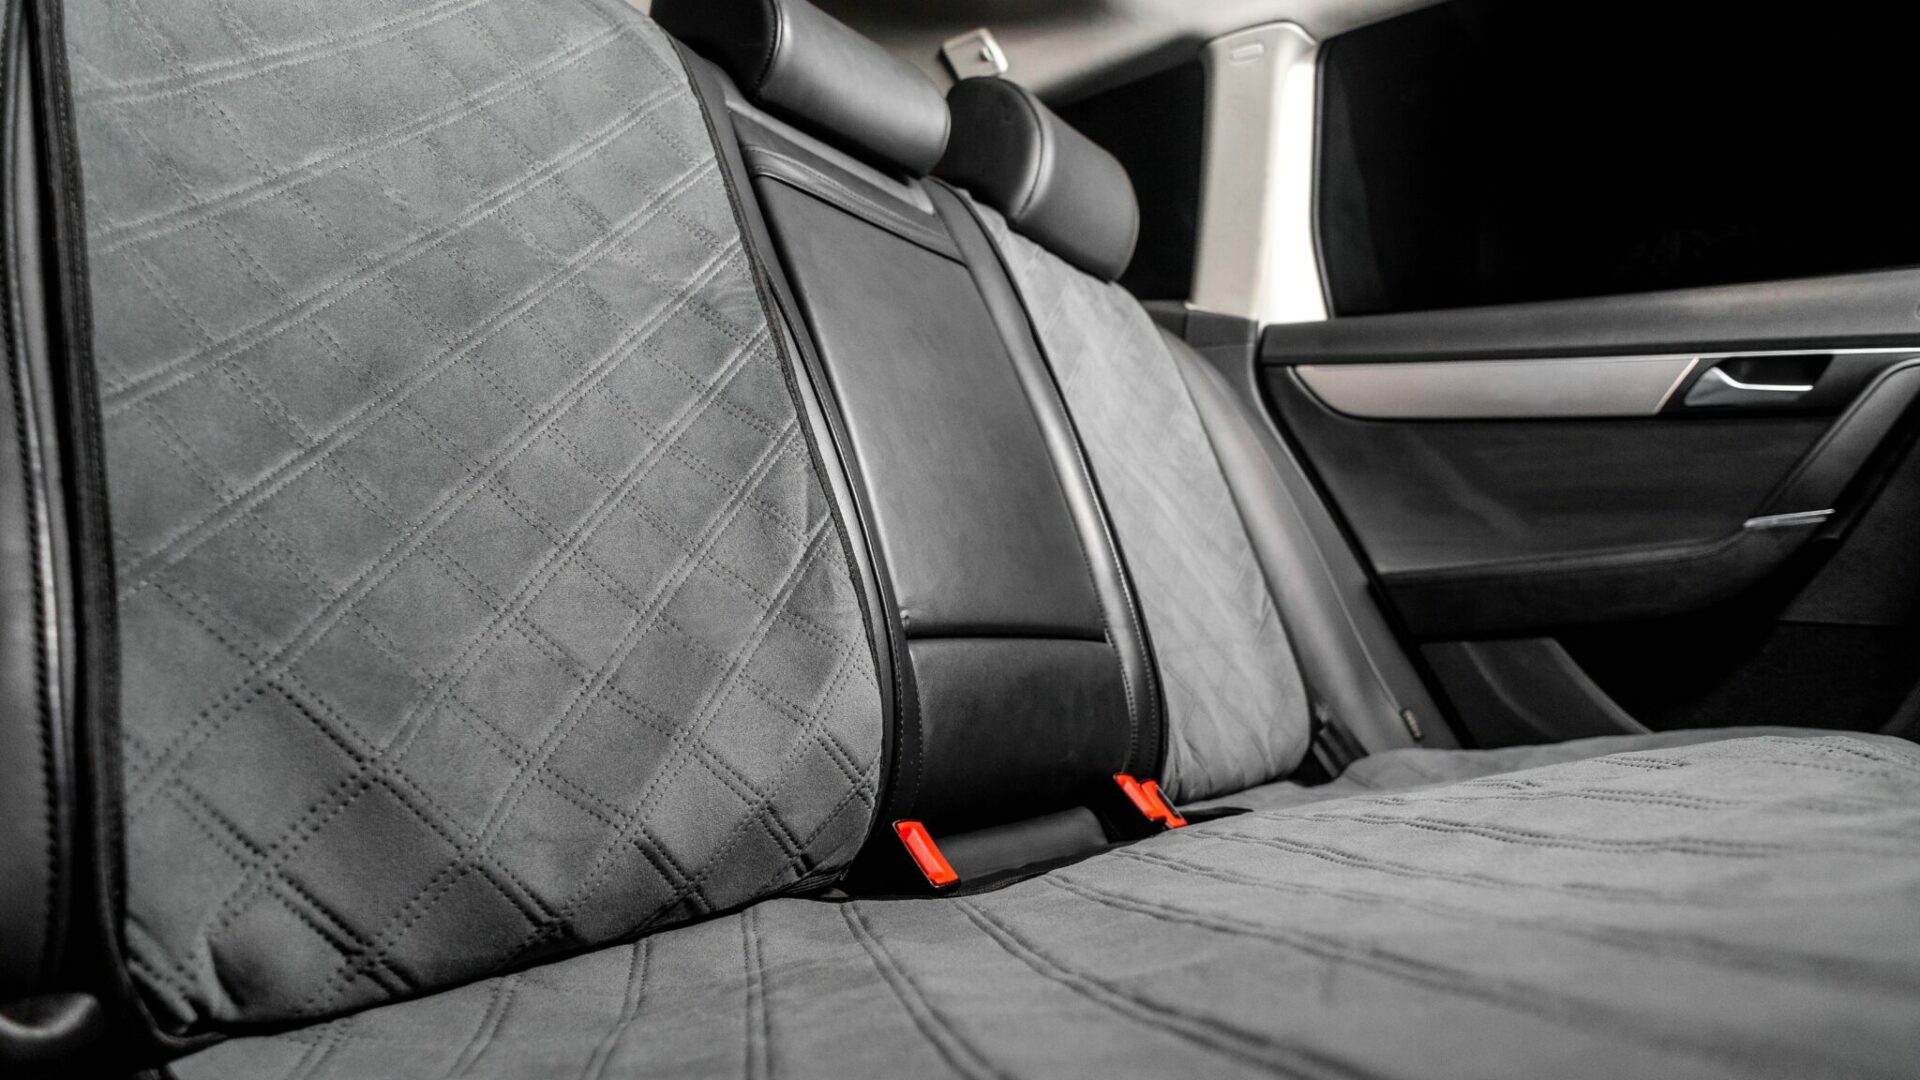 Seat Cushions with Non-Slip Bottoms for Enhanced Driving Comfort